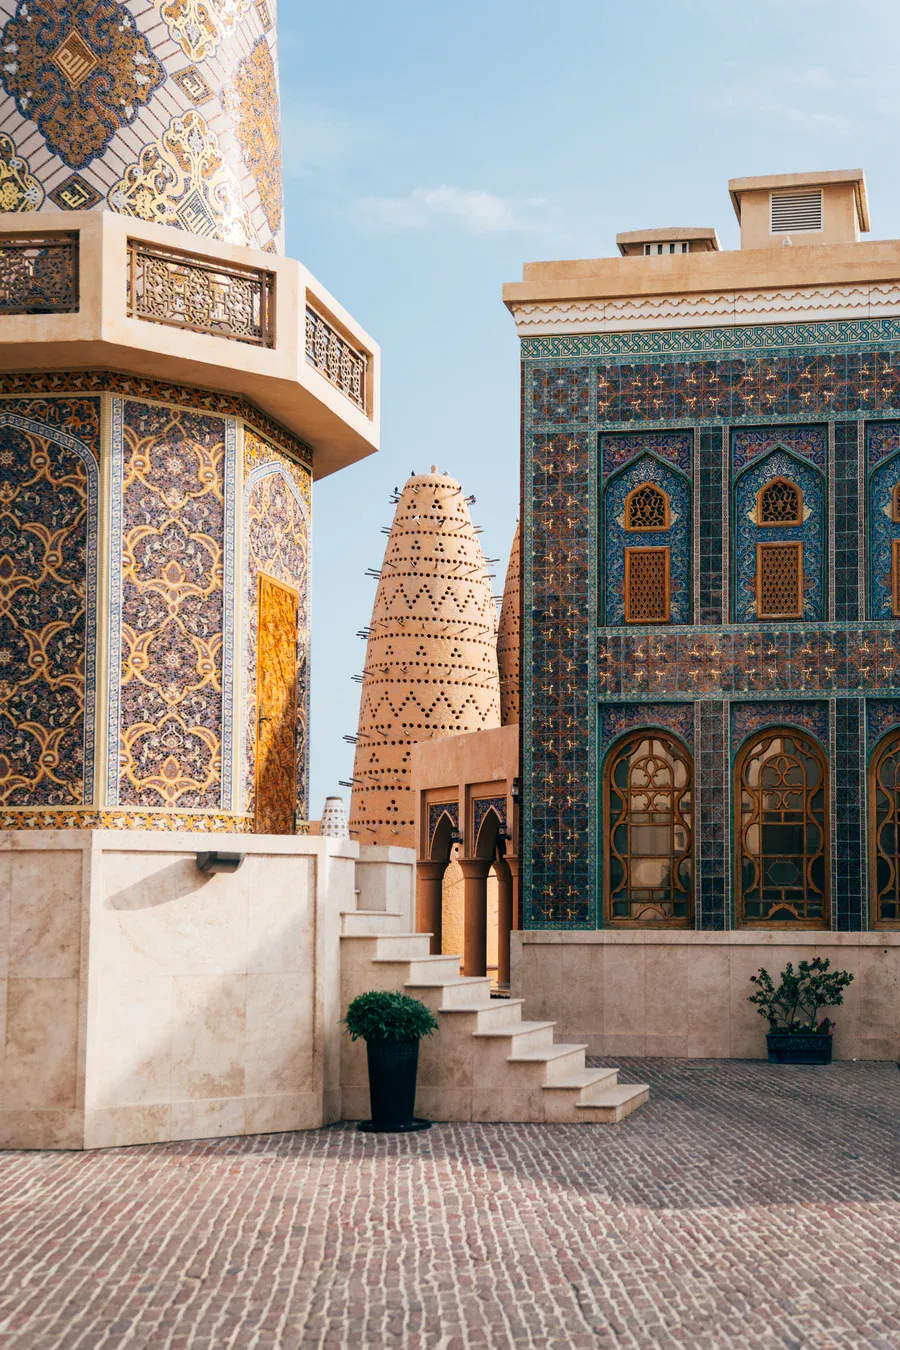 A corner of Katara Cultural Village with ornate facades of the blue mosque and one of the pigeon towers in the background.